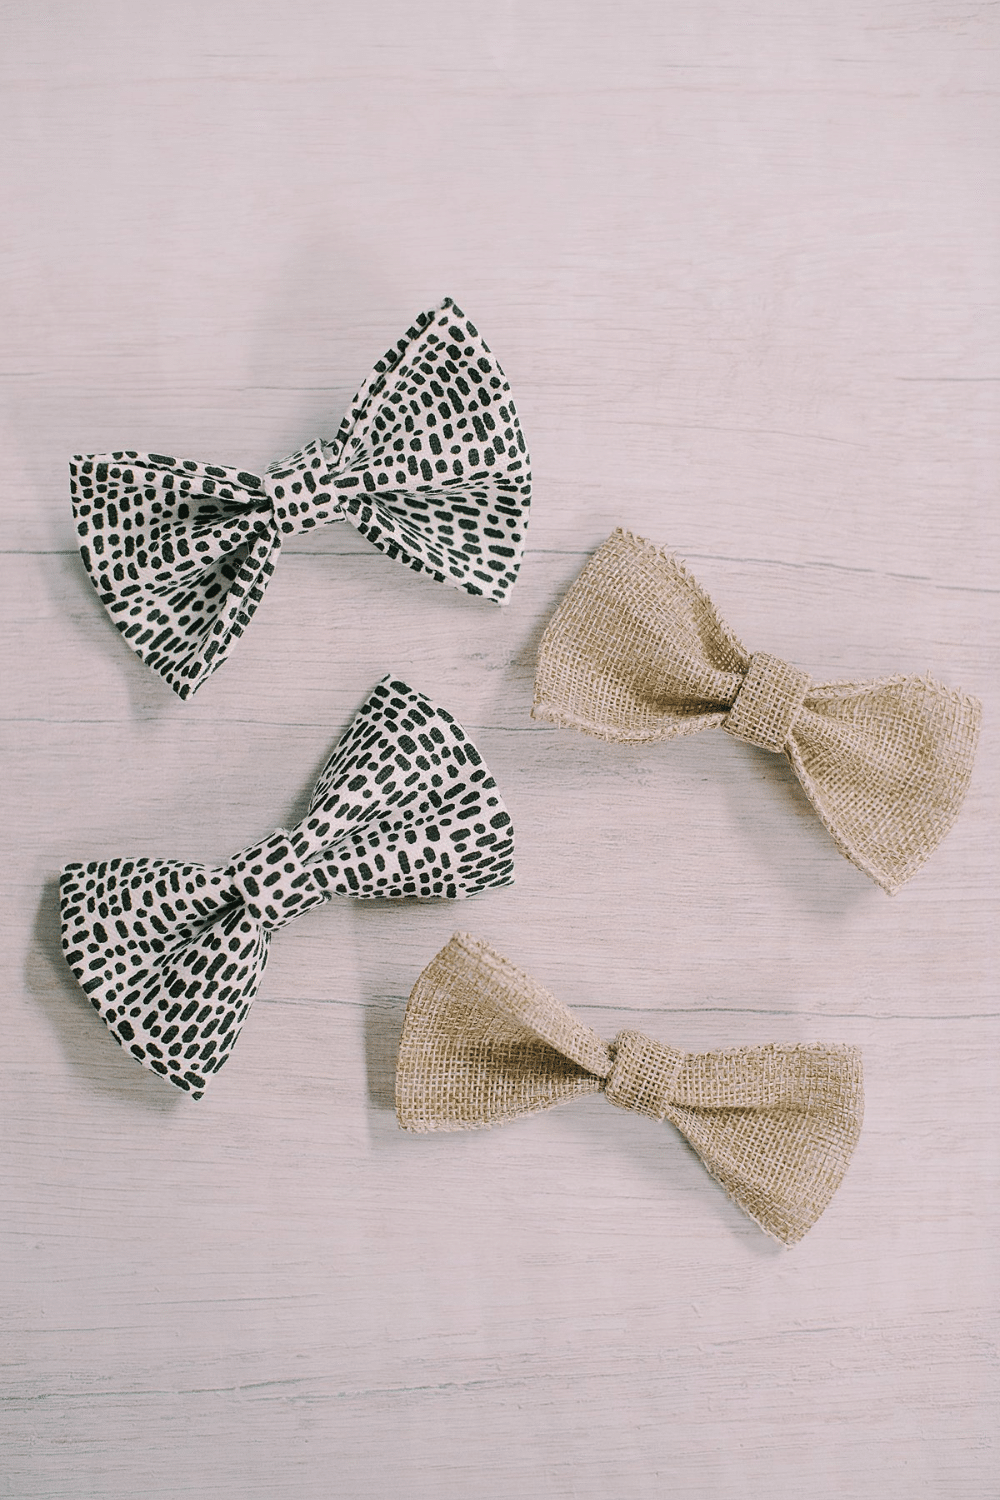 How to Make a Bow out of Fabric - Two Types of Bows